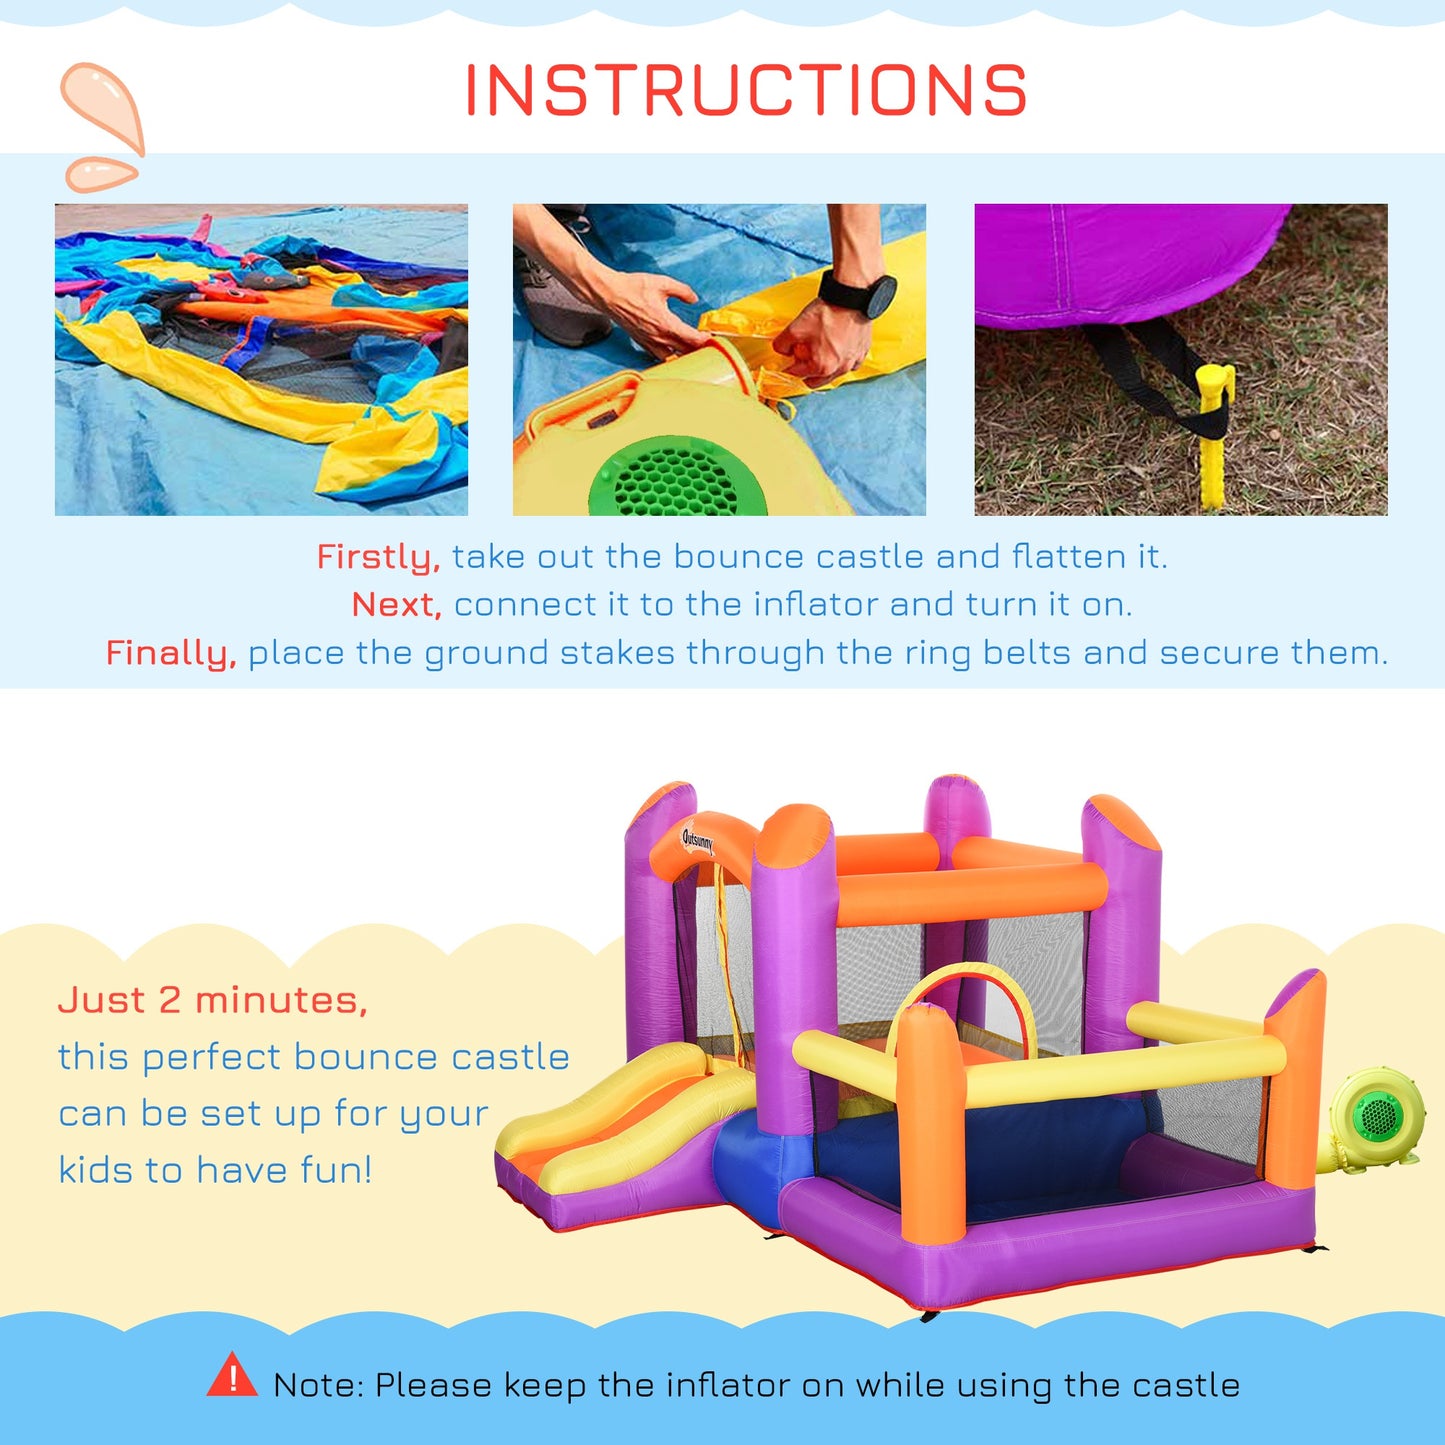 Outsunny Bounce Castle Inflatable Trampoline Slide Pool with inflator 3 x 2.8 x 1.7m